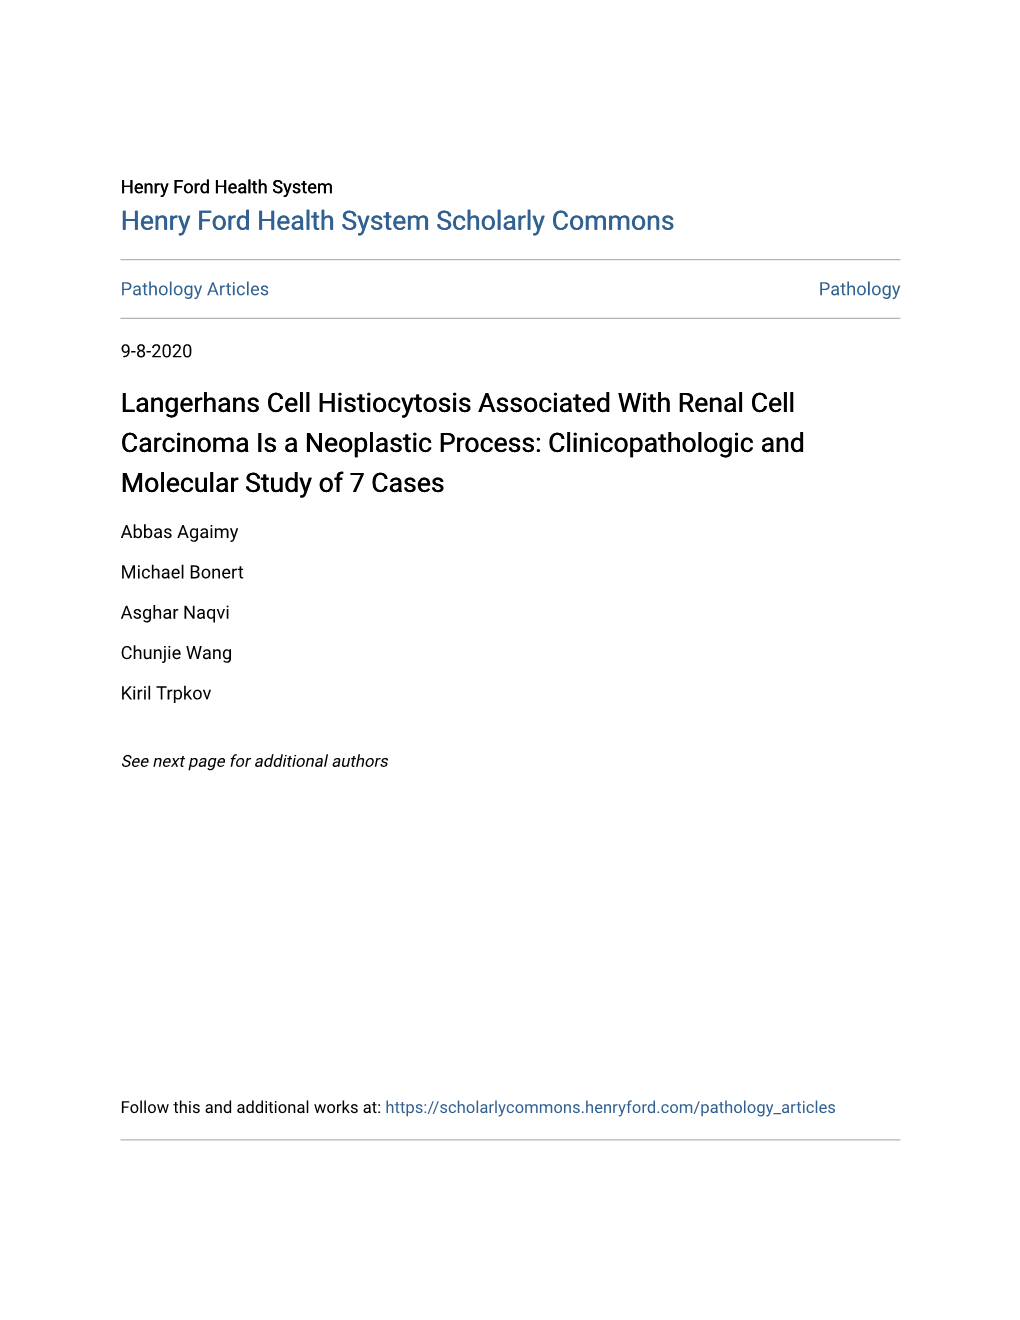 Langerhans Cell Histiocytosis Associated with Renal Cell Carcinoma Is a Neoplastic Process: Clinicopathologic and Molecular Study of 7 Cases